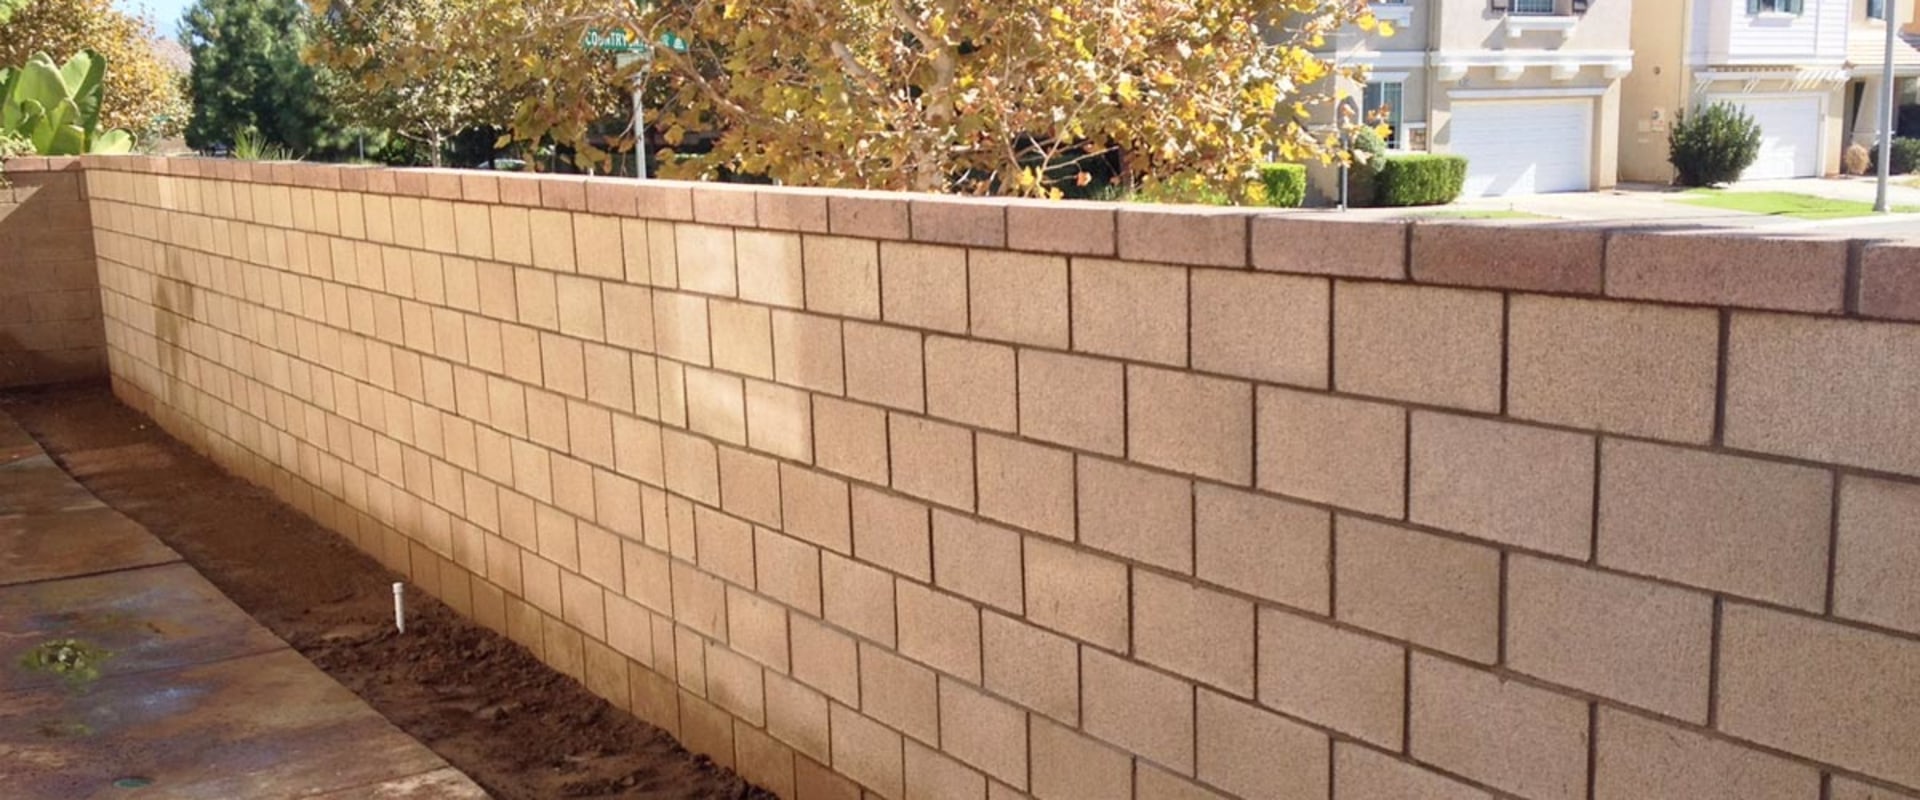 How much does it cost to repair a cinder block wall?